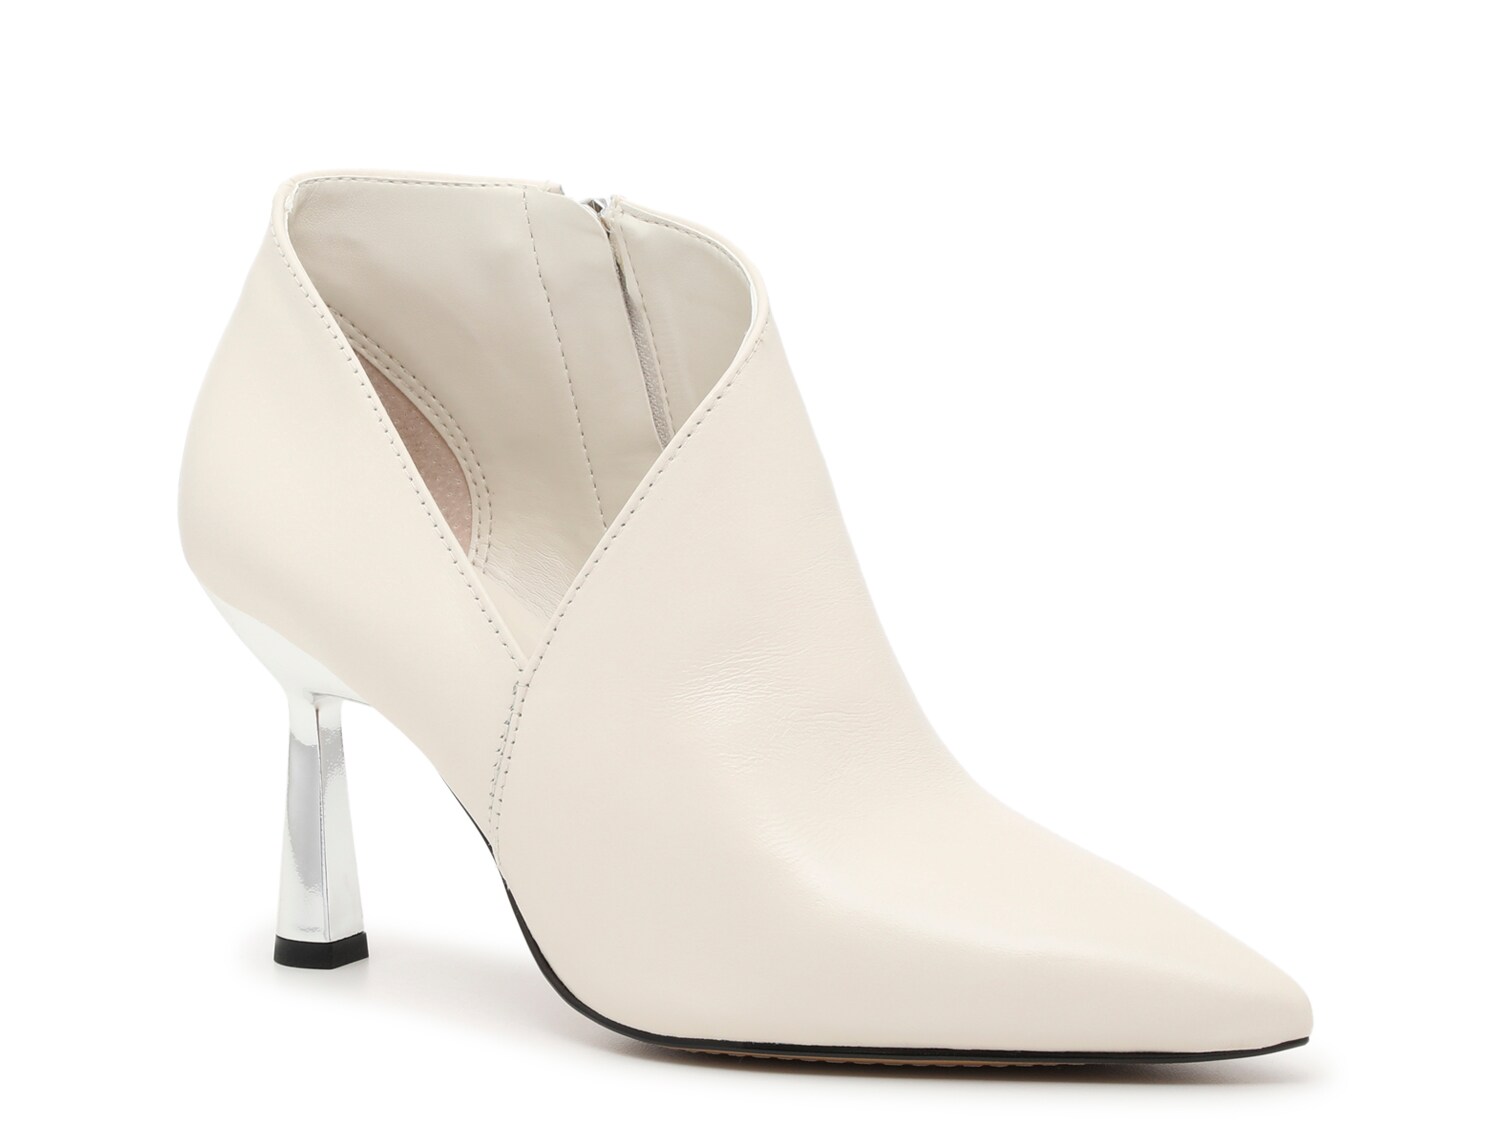 Vince Camuto Tannido Bootie - Free Shipping | DSW